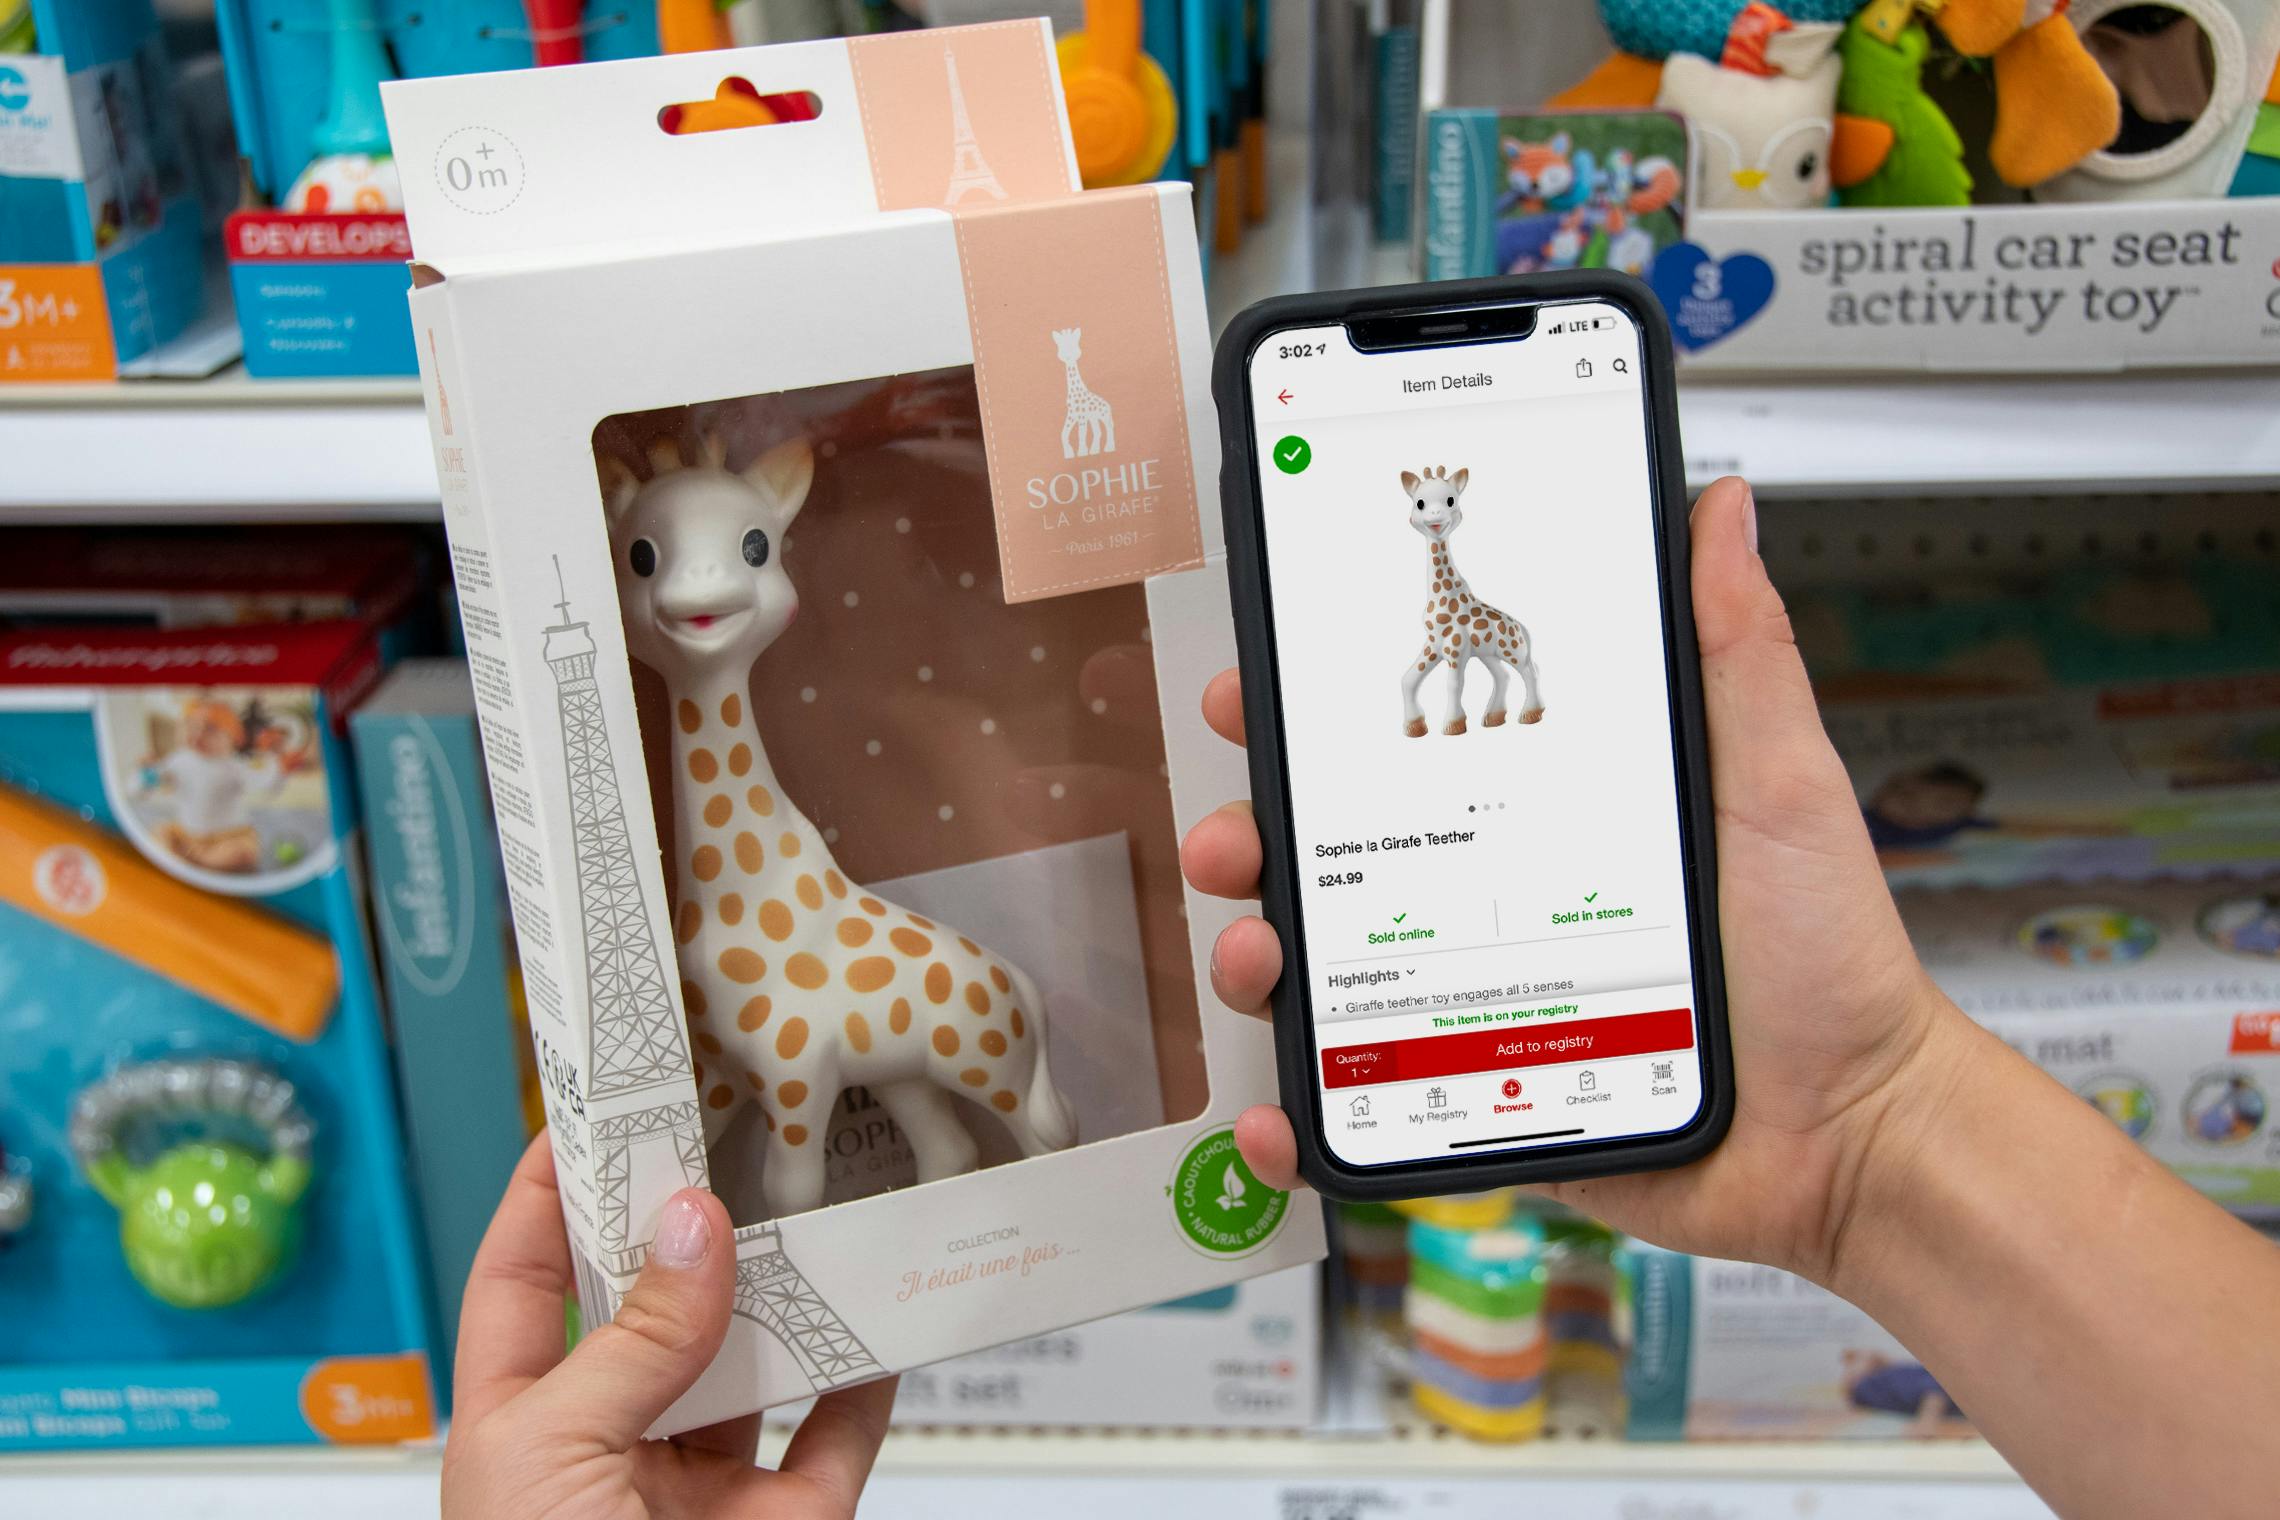 A toy giraffe held next to the Target registry app displaying that item.